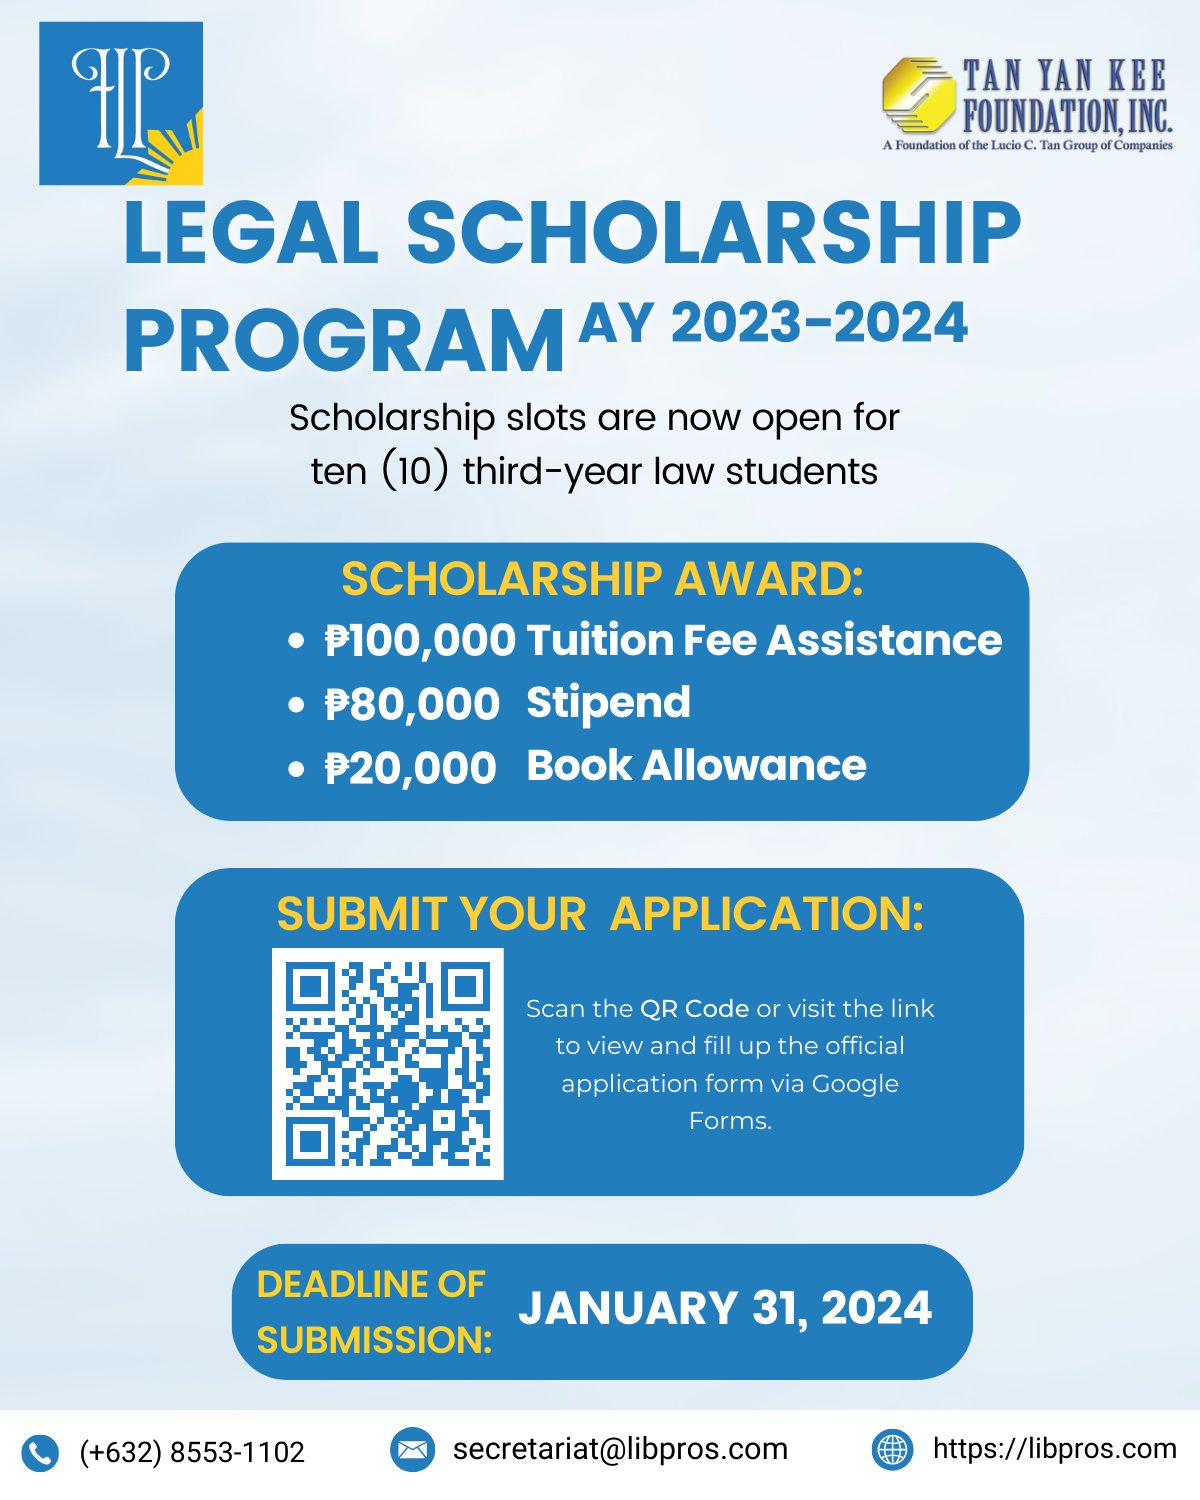 SCHOLARSHIP OPPORTUNITY FOR THIRD-YEAR LAW STUDENTS